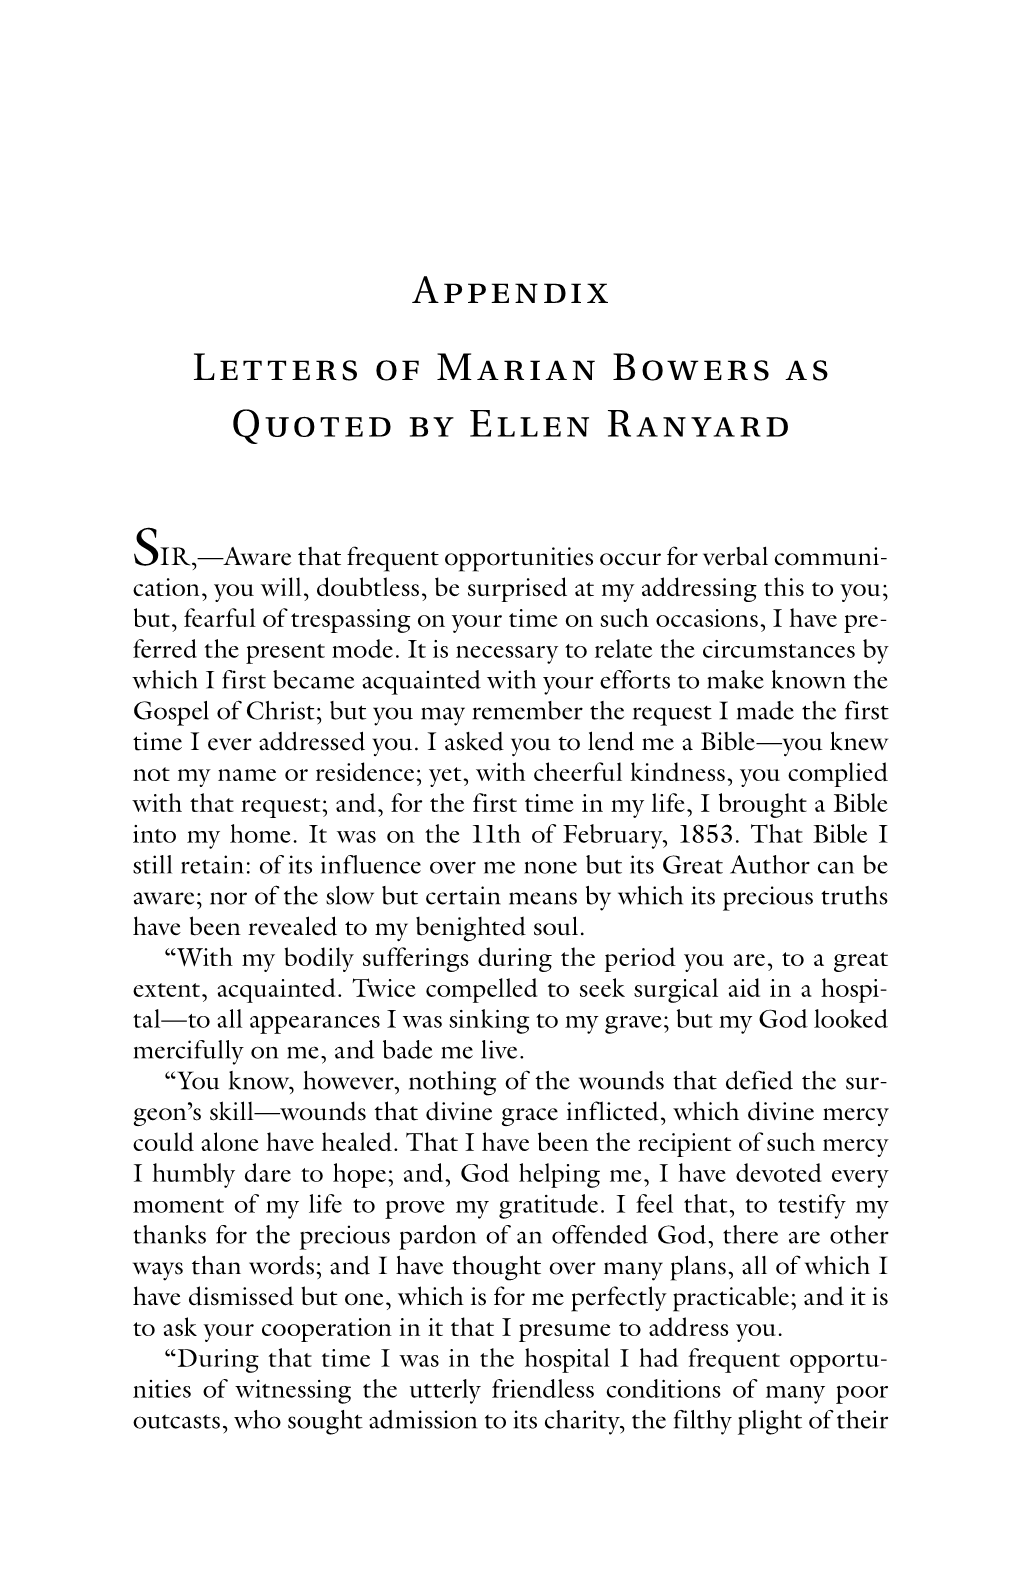 Appendix Letters of Marian Bowers As Quoted by Ellen Ranyard